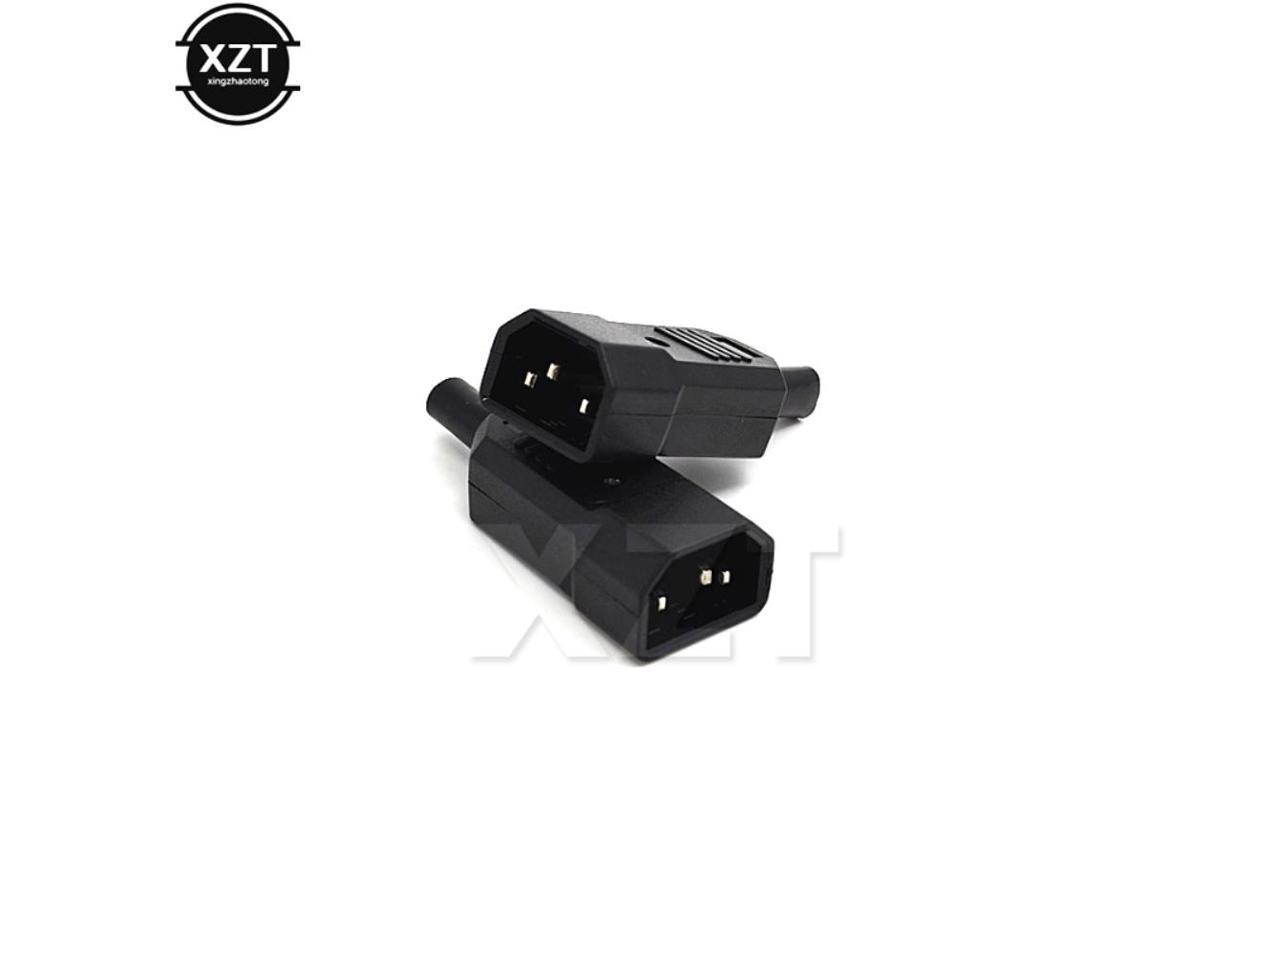 Details about   3 Pin IEC 320 C14 Male Plug Rewirable Power Connector Socket AC Panel Socket H$ 